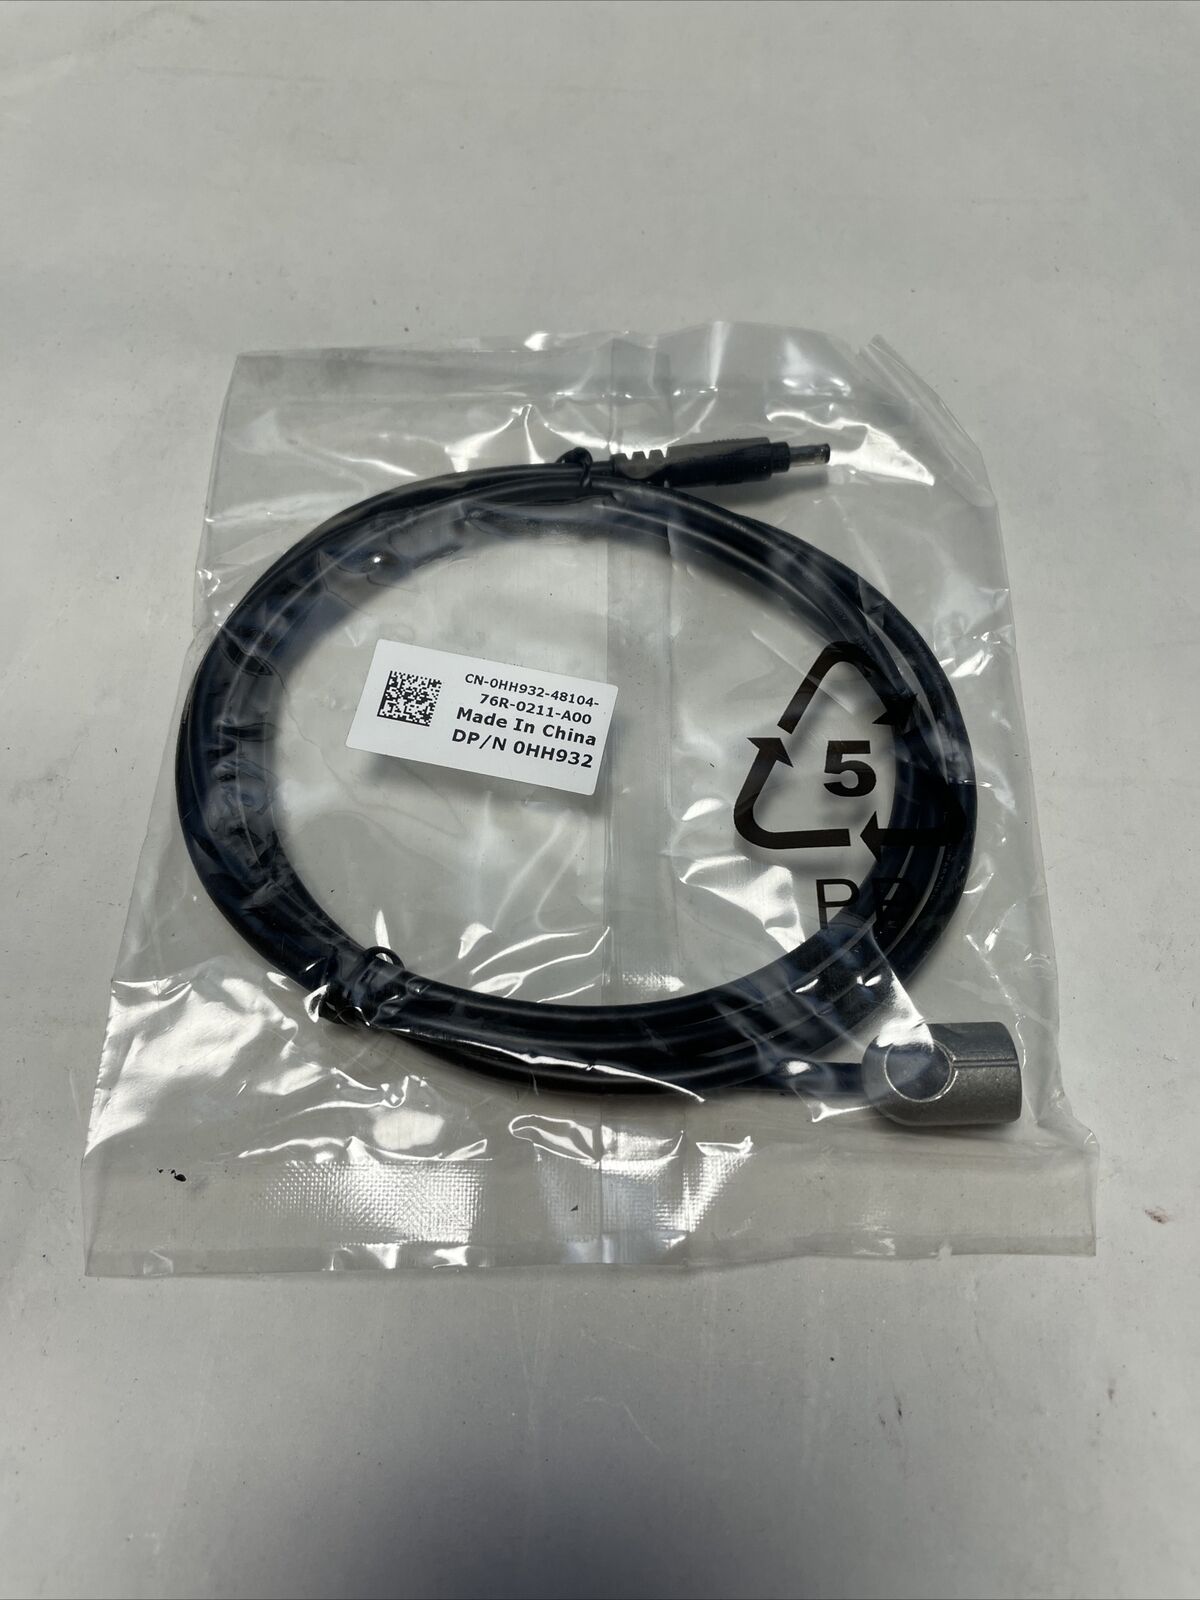 DELL 0HH932 SERVER STATUS INDICATOR LED CABLE NEW SEALED PACKAGE